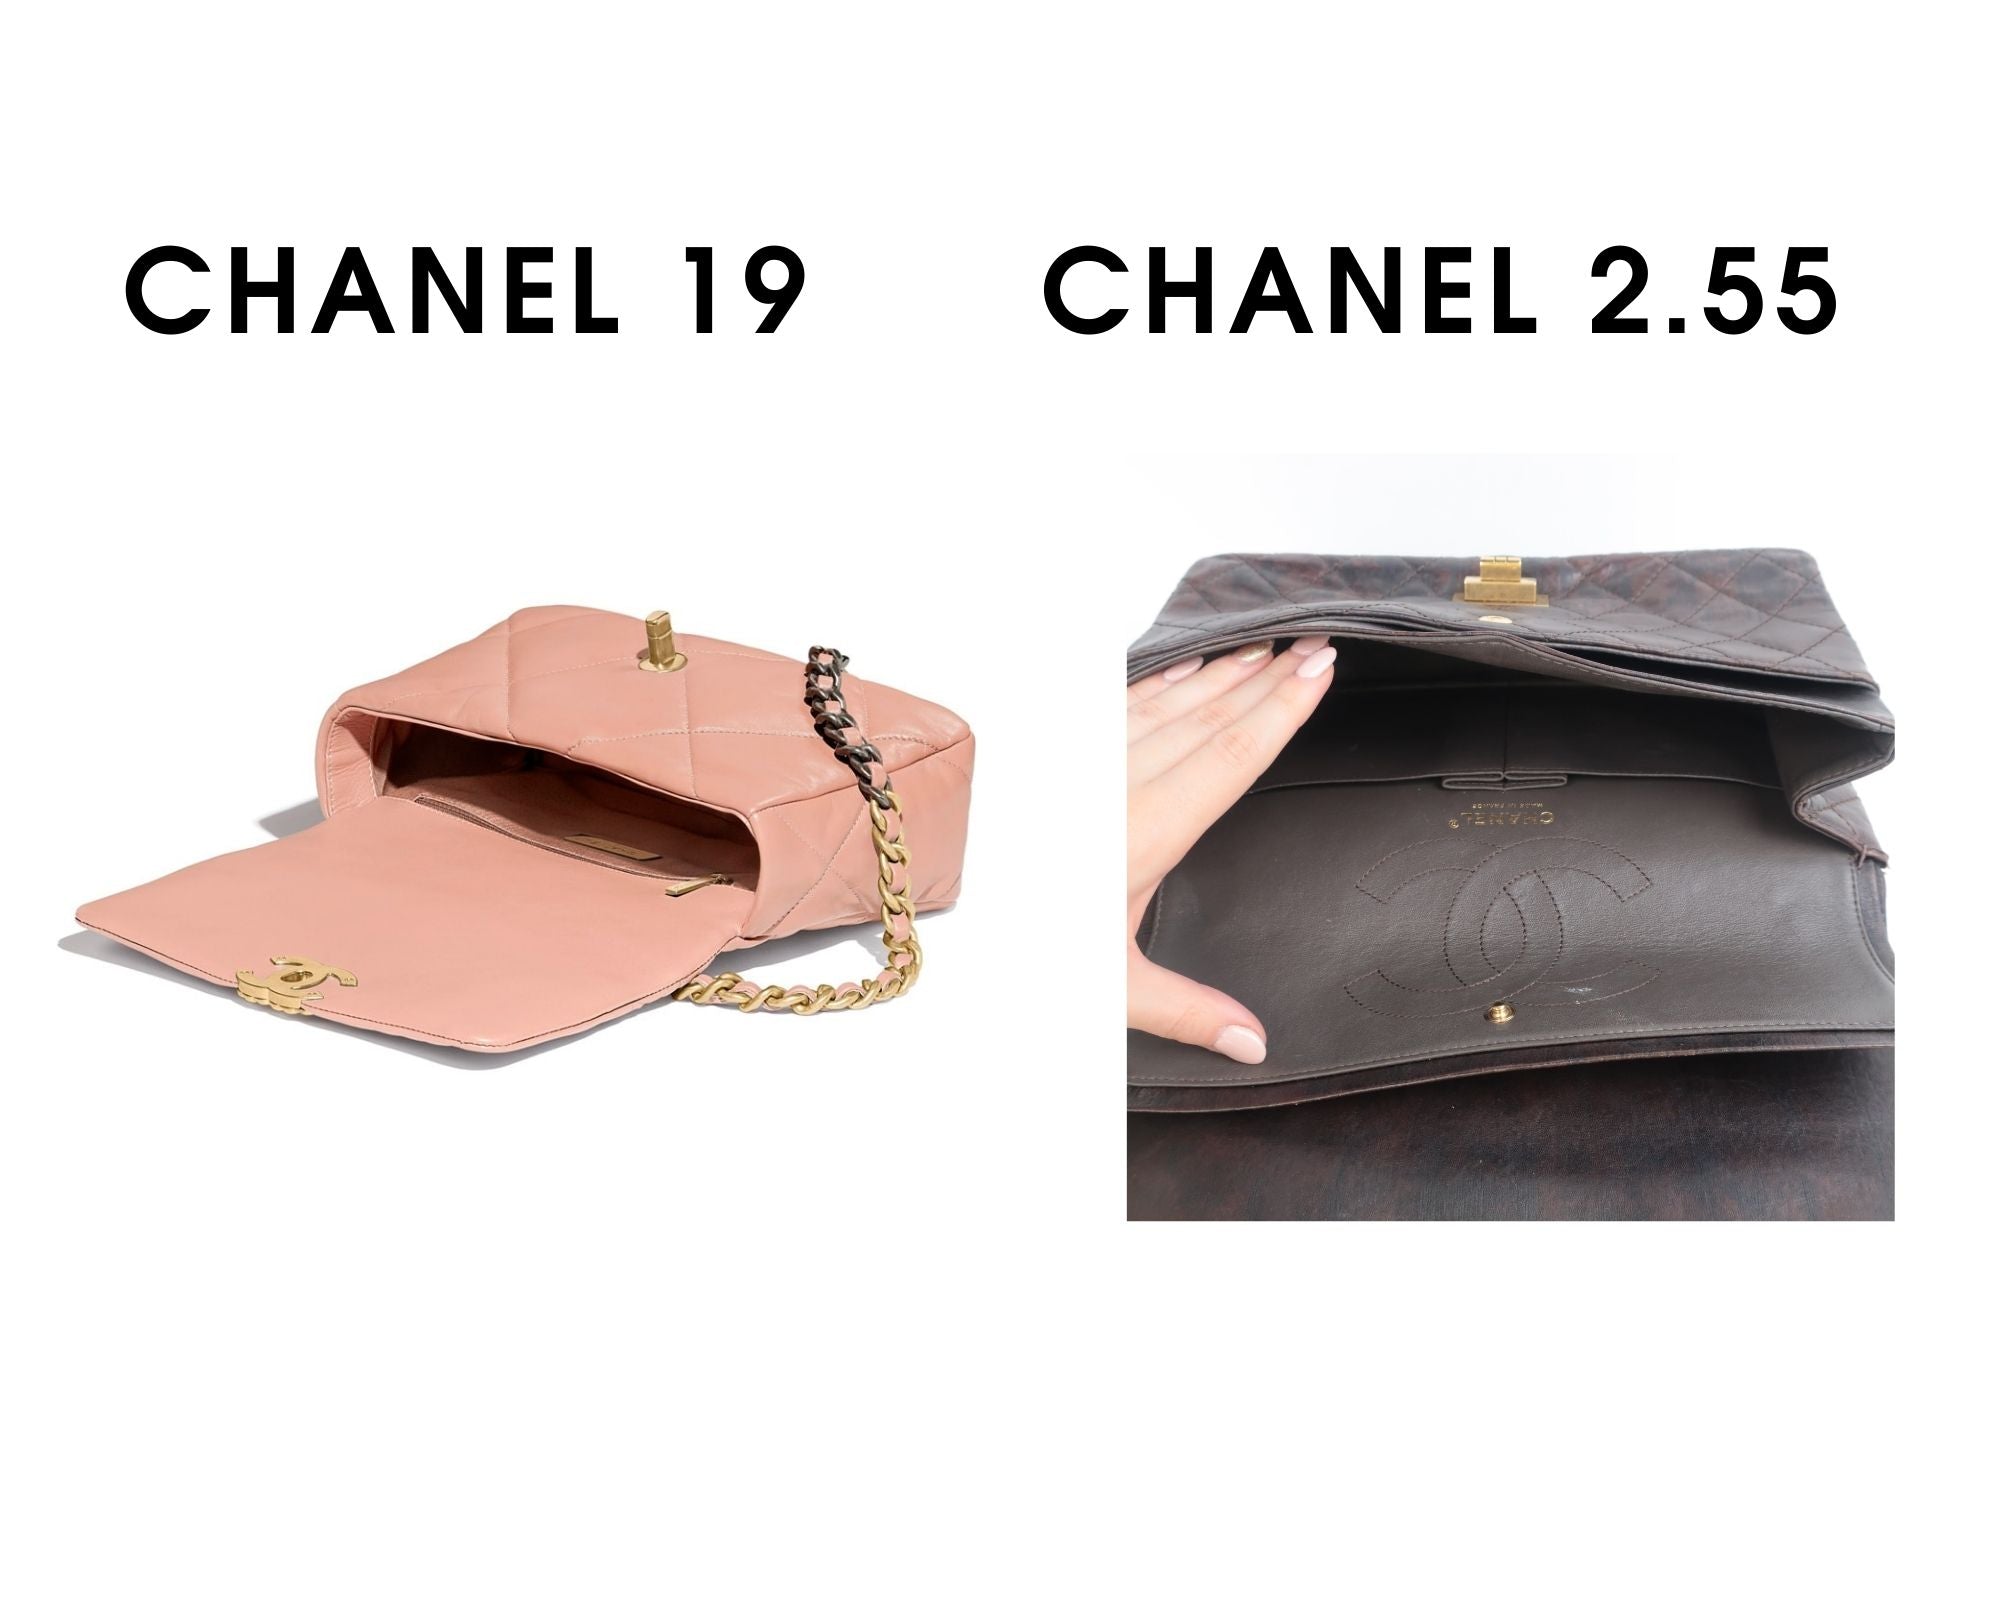 Is Chanel 19 Bag Worth Buying? Ultimate New Chanel “It” Bag Review Chanel 19 vs Chanel 2 55